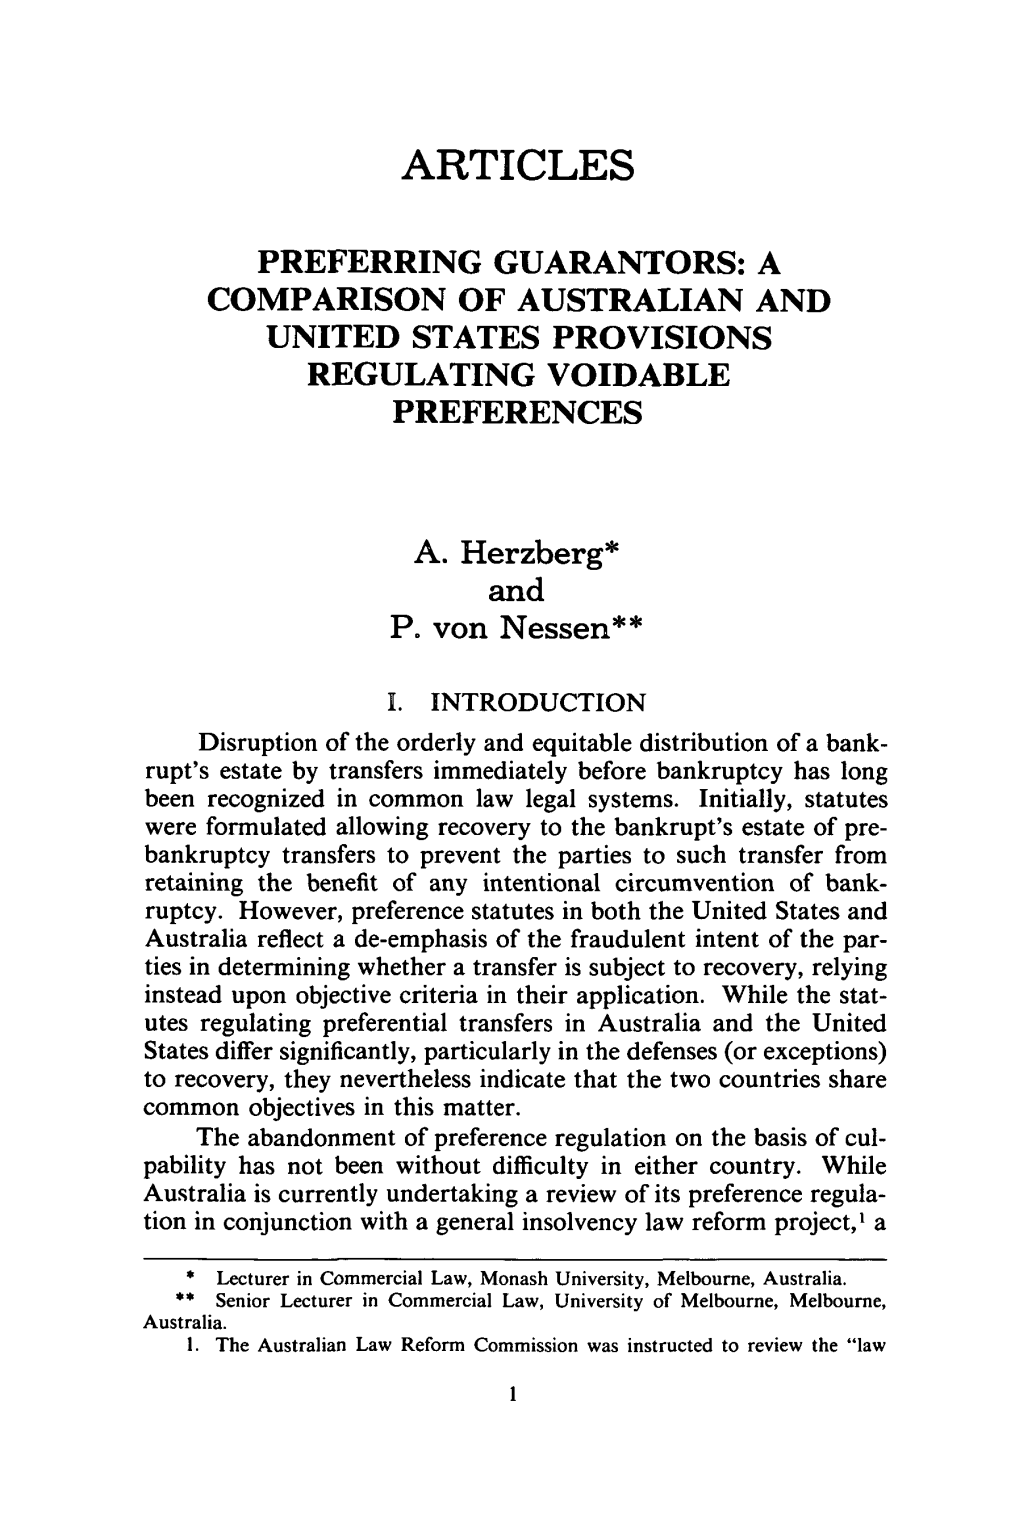 Preferring Guarantors: a Comparison of Australian and United States Provisions Regulating Voidable Preferences